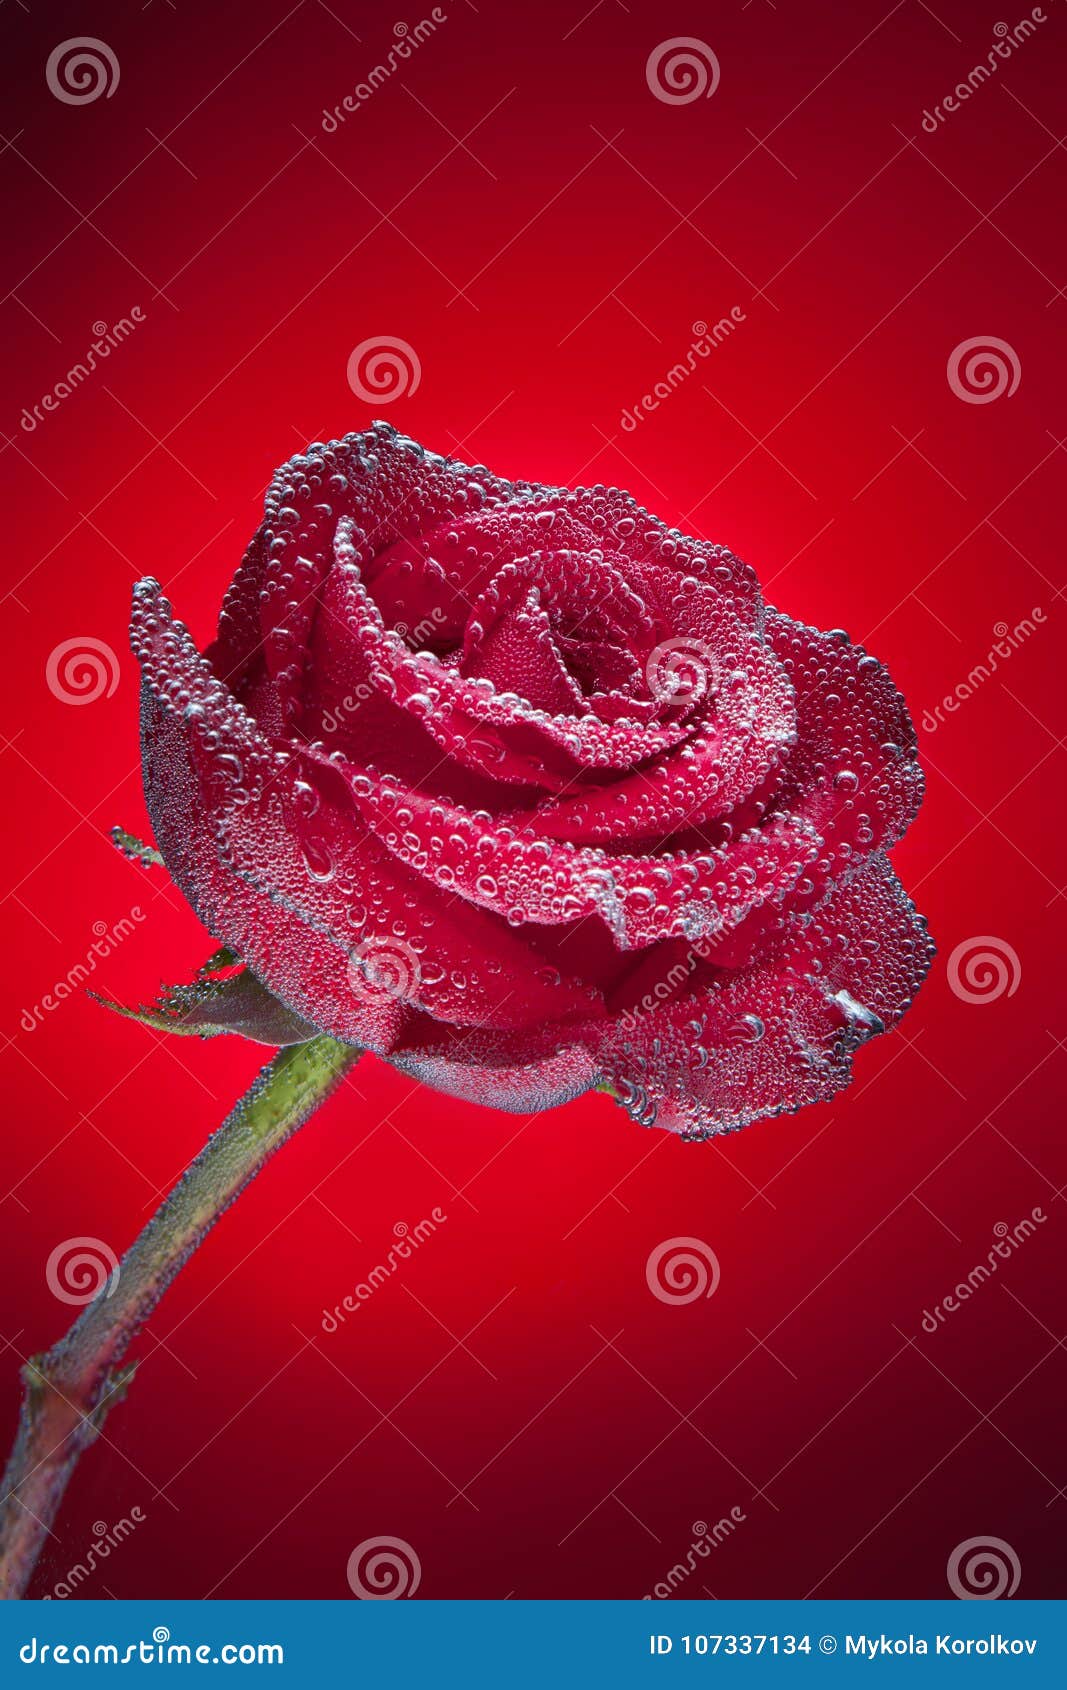 Flowers Under The Water, Red Rose With Air Bubbles Stock Photo ...